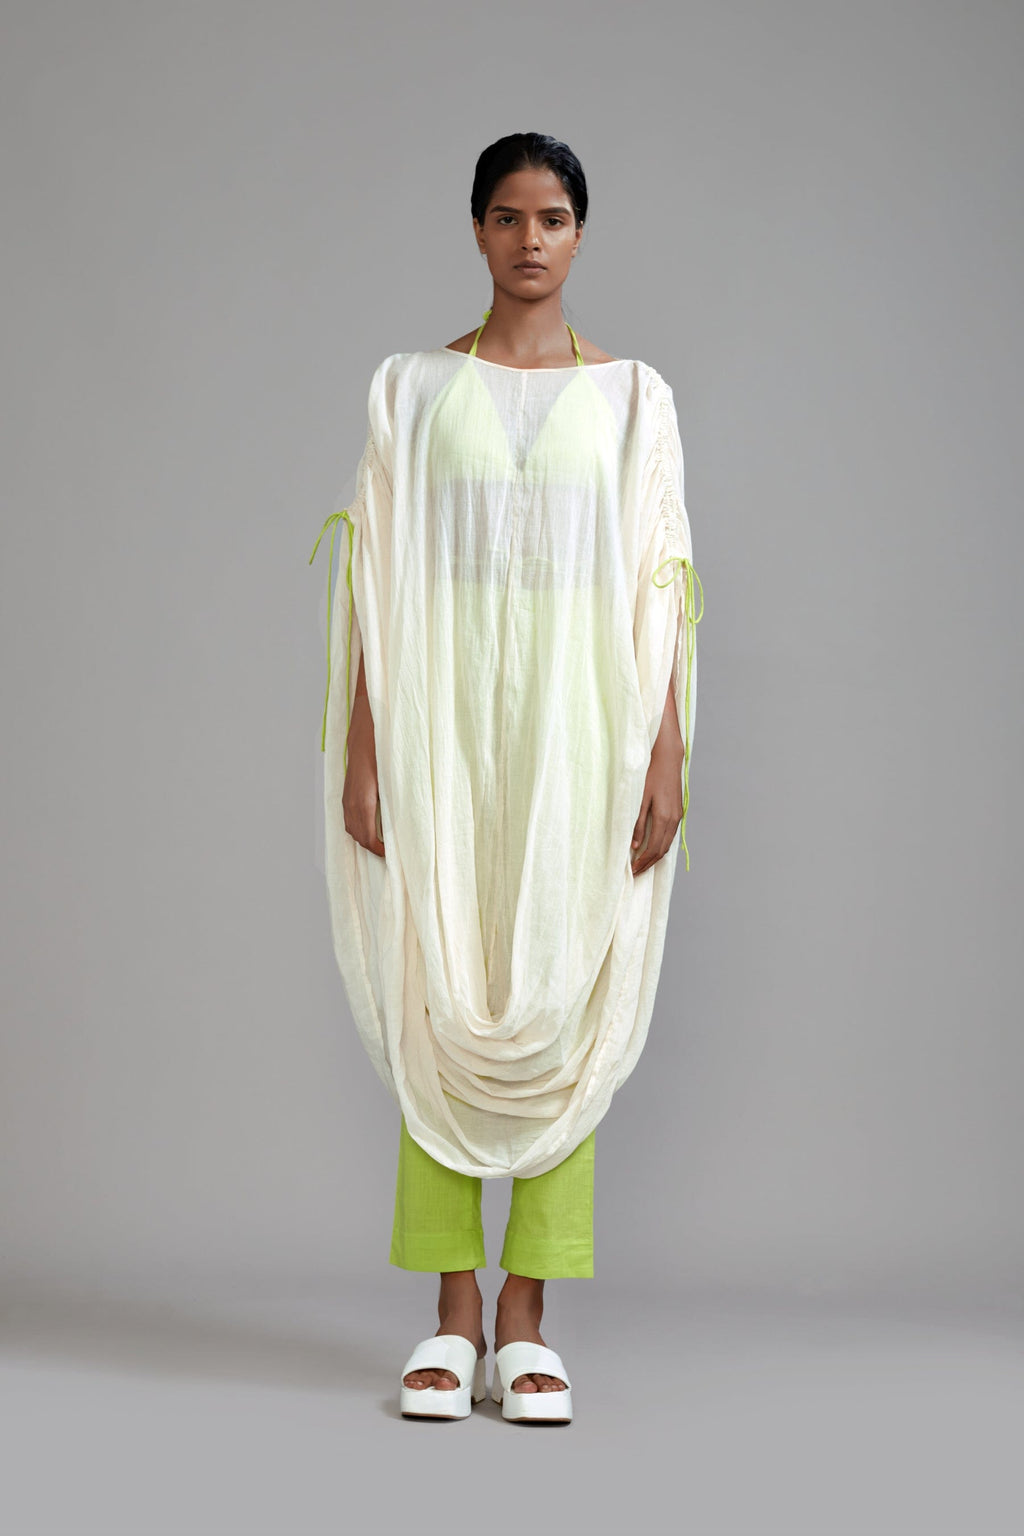 Mati Outfit Sets XS Off-White with Neon Green Gathered Cowl Tunic Set (3 PCS) (Ready to Ship)